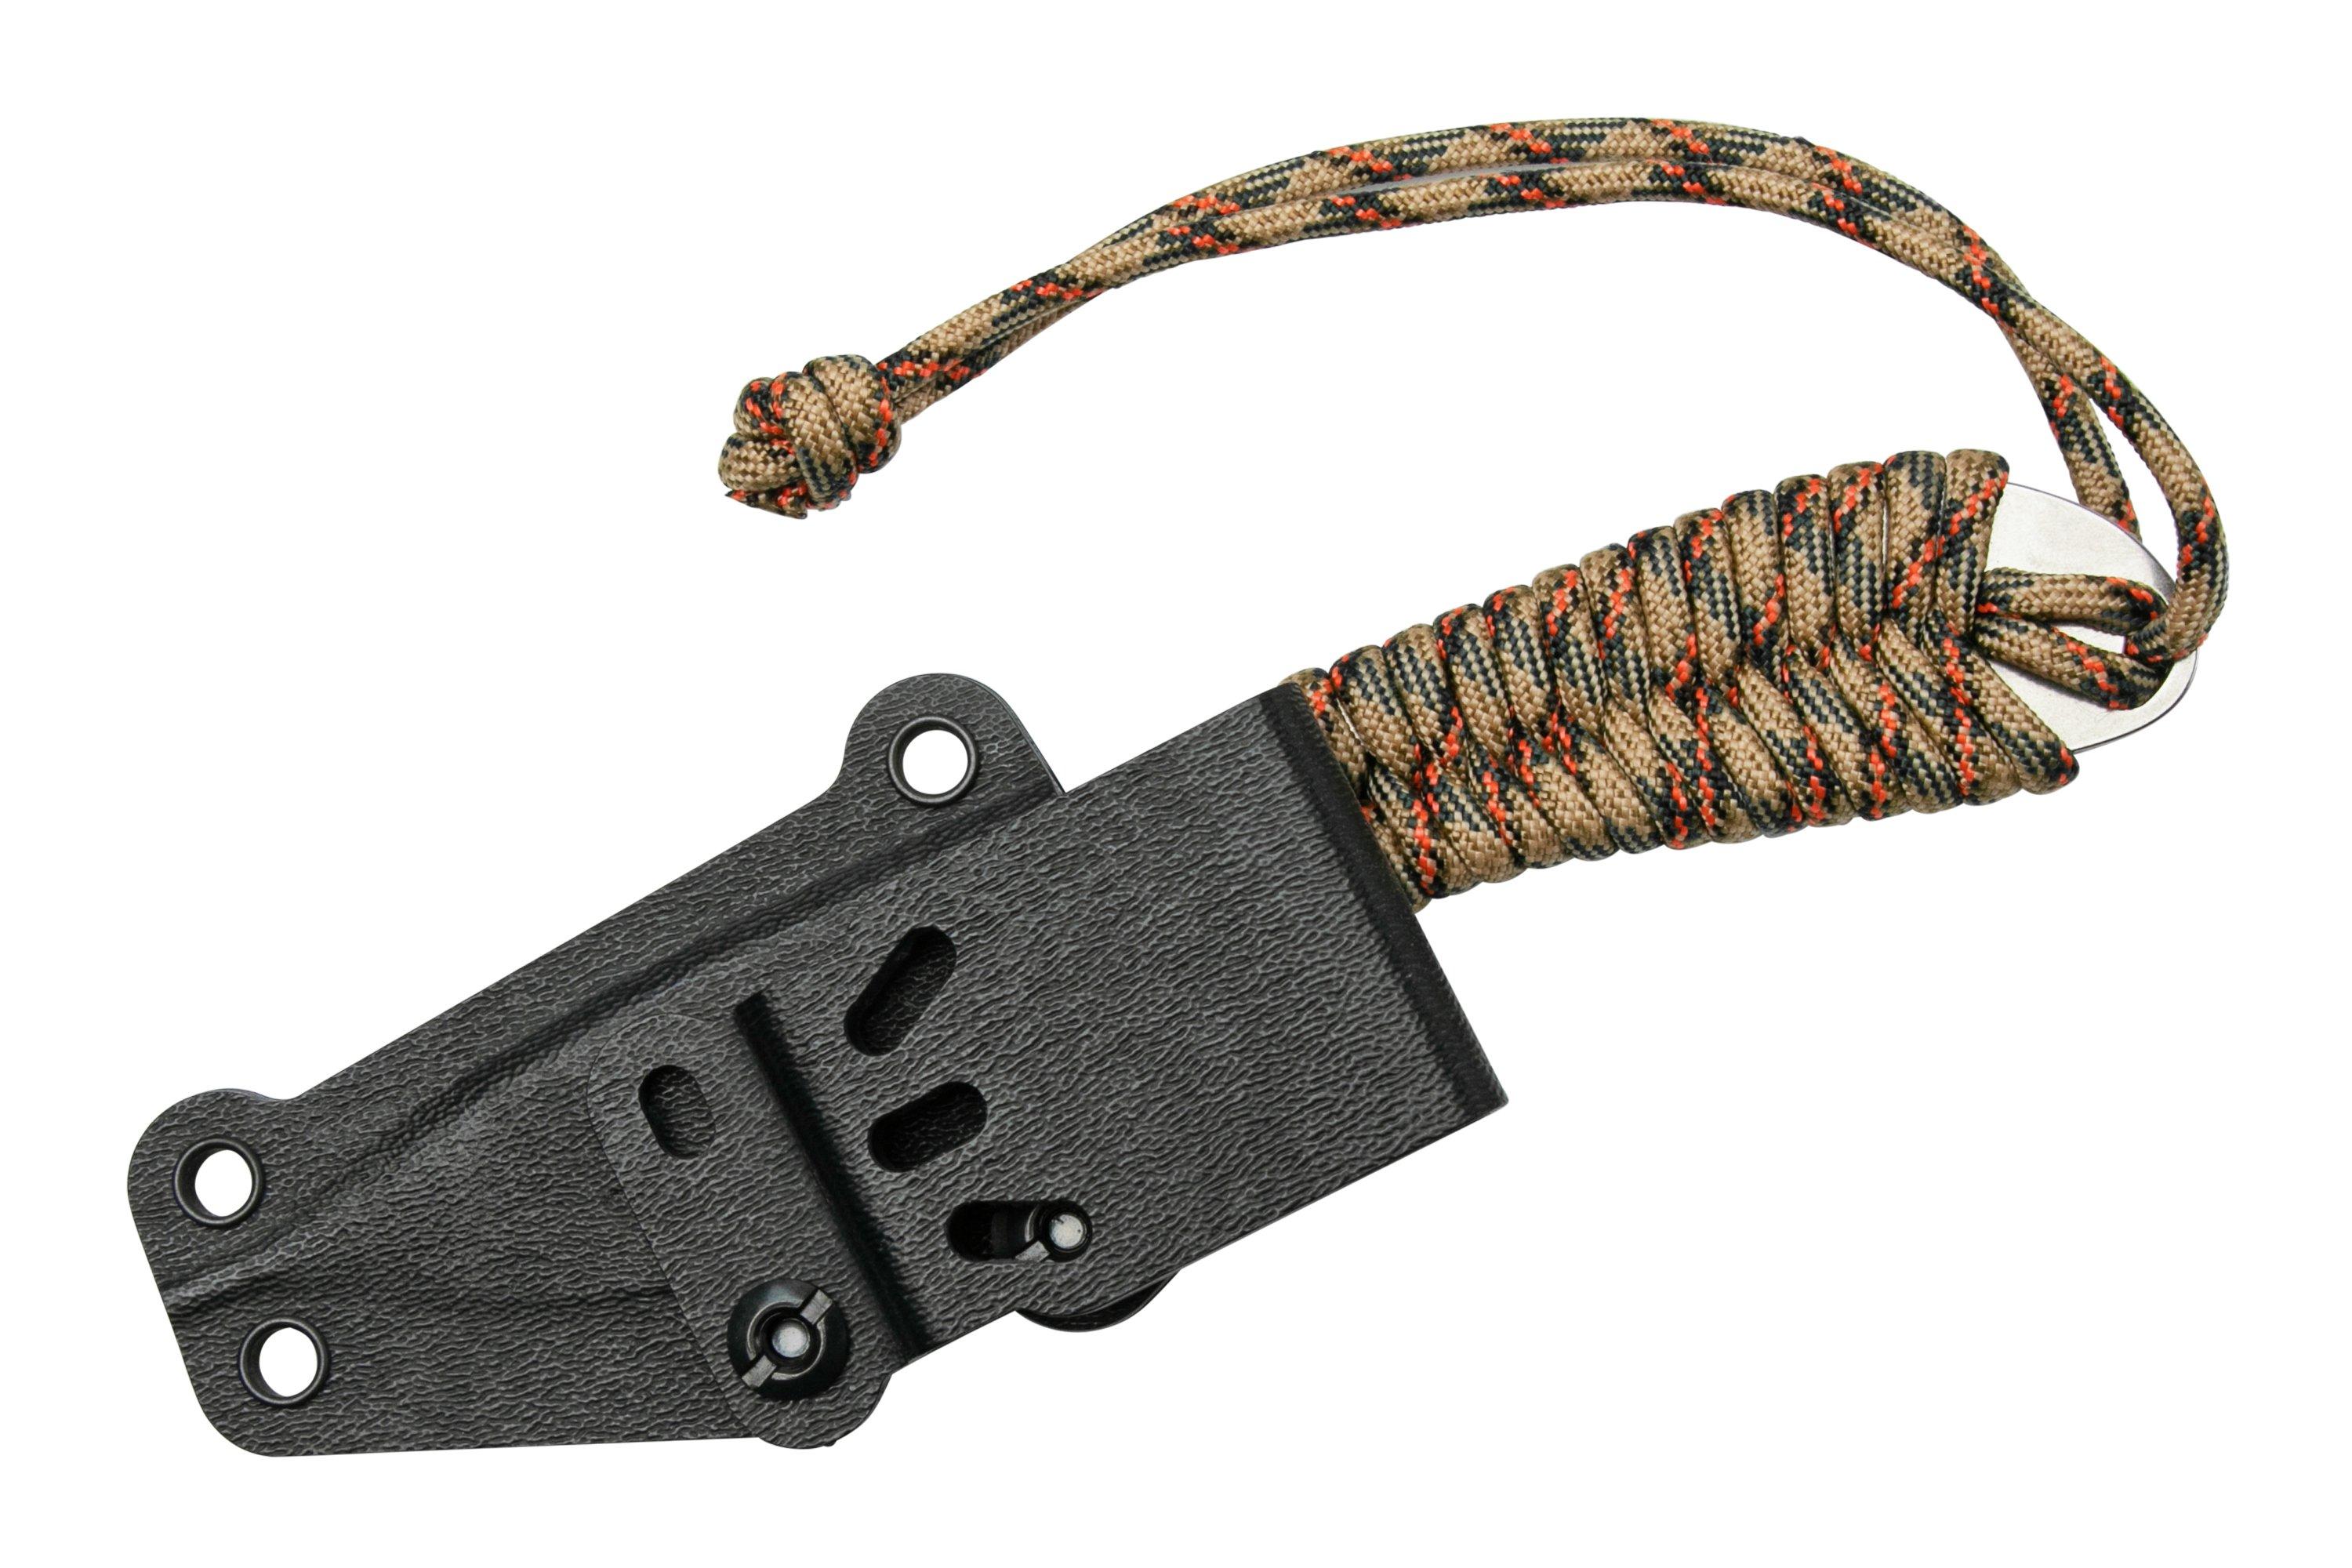 White River Knives M1 Backpacker Camo Paracord neck knife, Kydex 